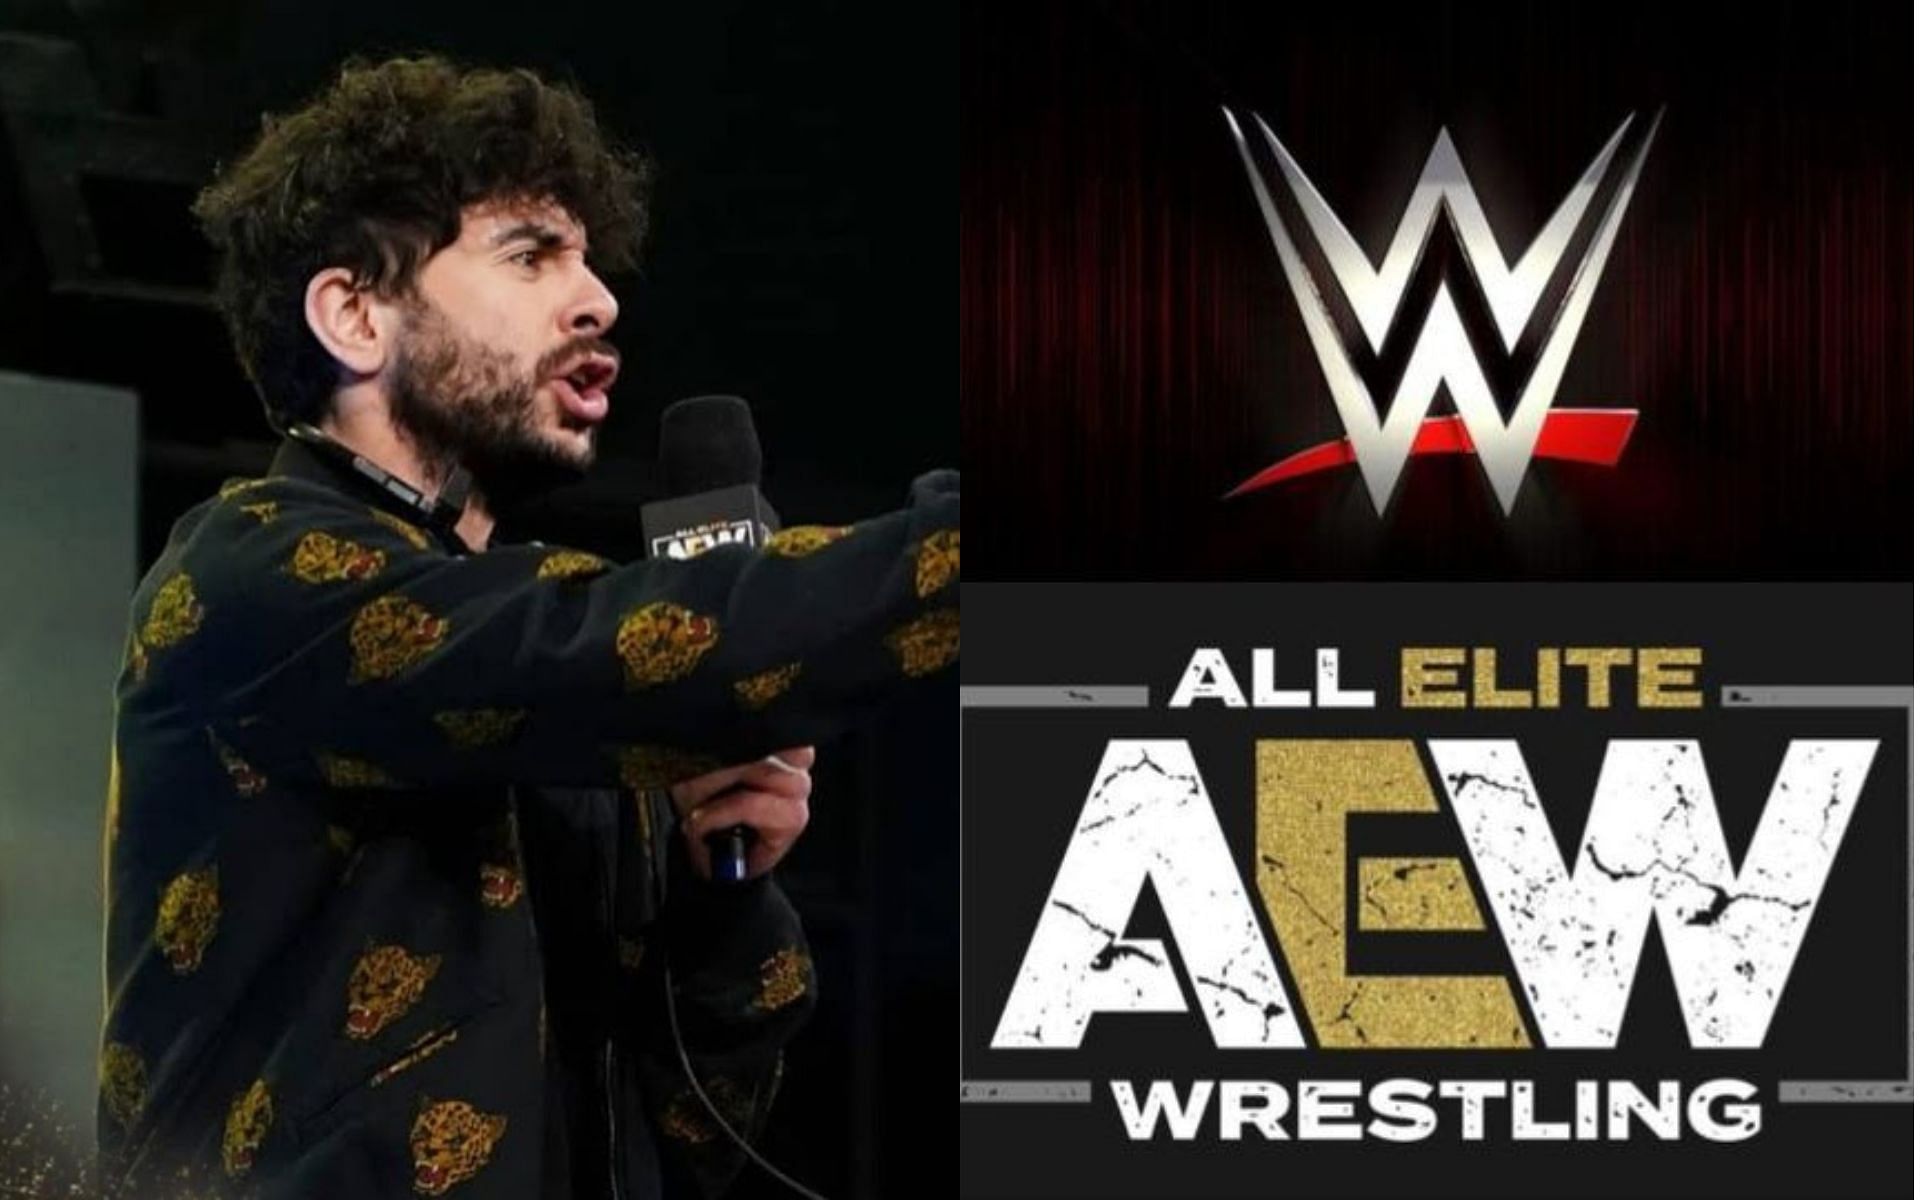 AEW President Tony Khan (left) and WWE and AEW logos (right).